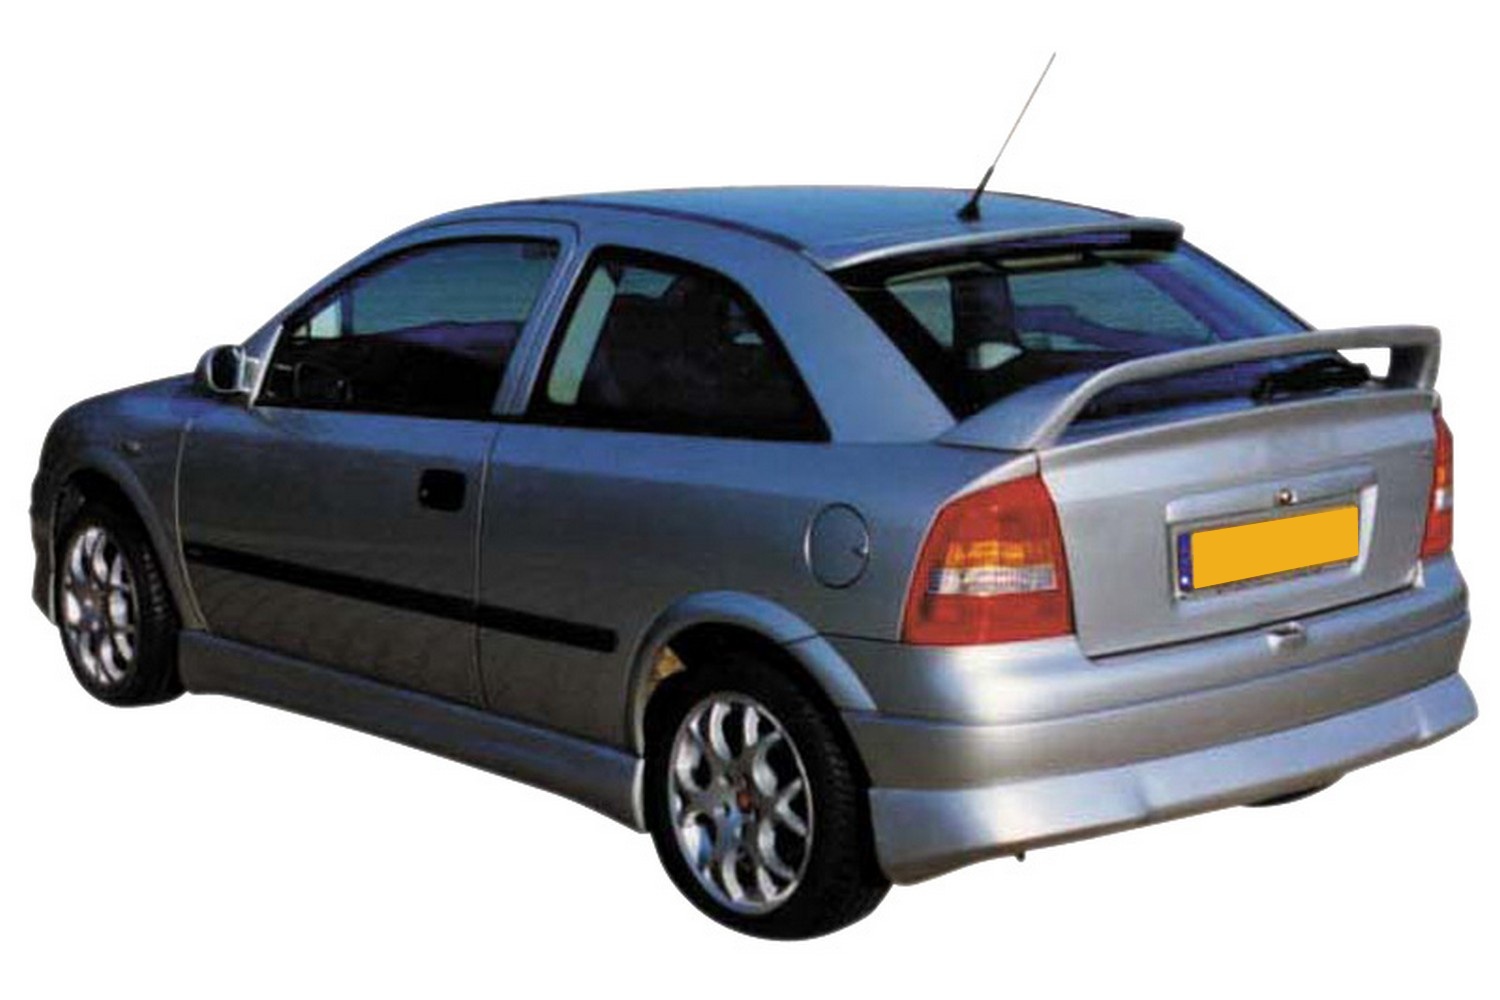 Opel Astra G] Does anyone have info on this spoiler? Apparently it should  be stock/from factory, but is it really? Was it an optional extra or is  this fitted from an OPC